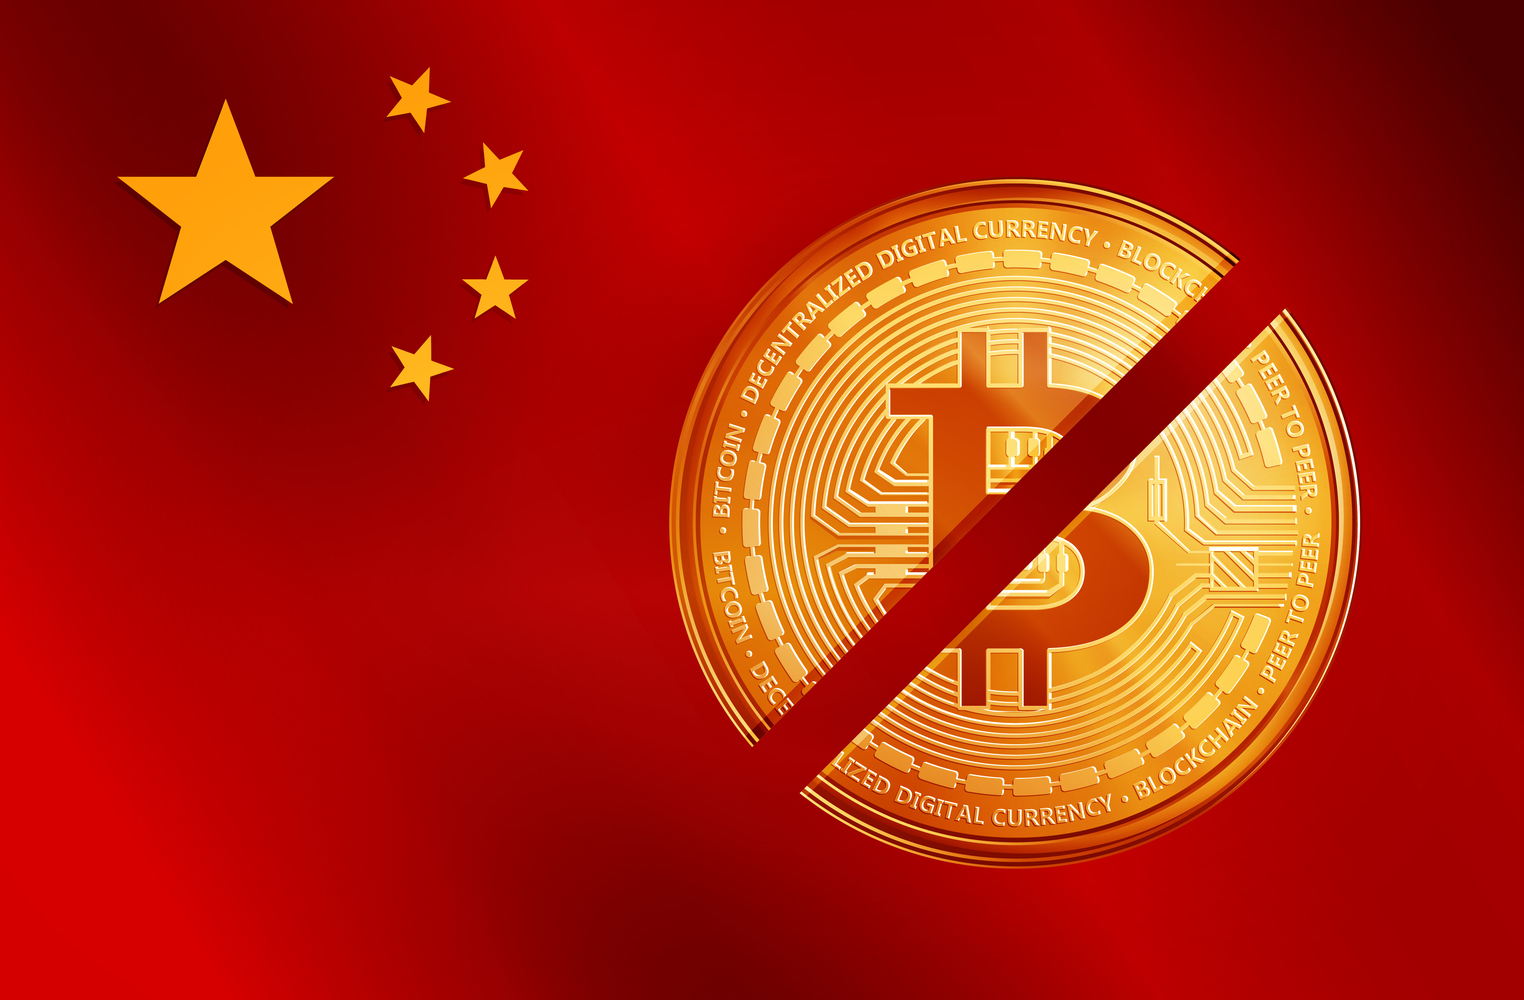 Digital Yuan: China Races to be the First Country to issue a Central Bank Digital Currency